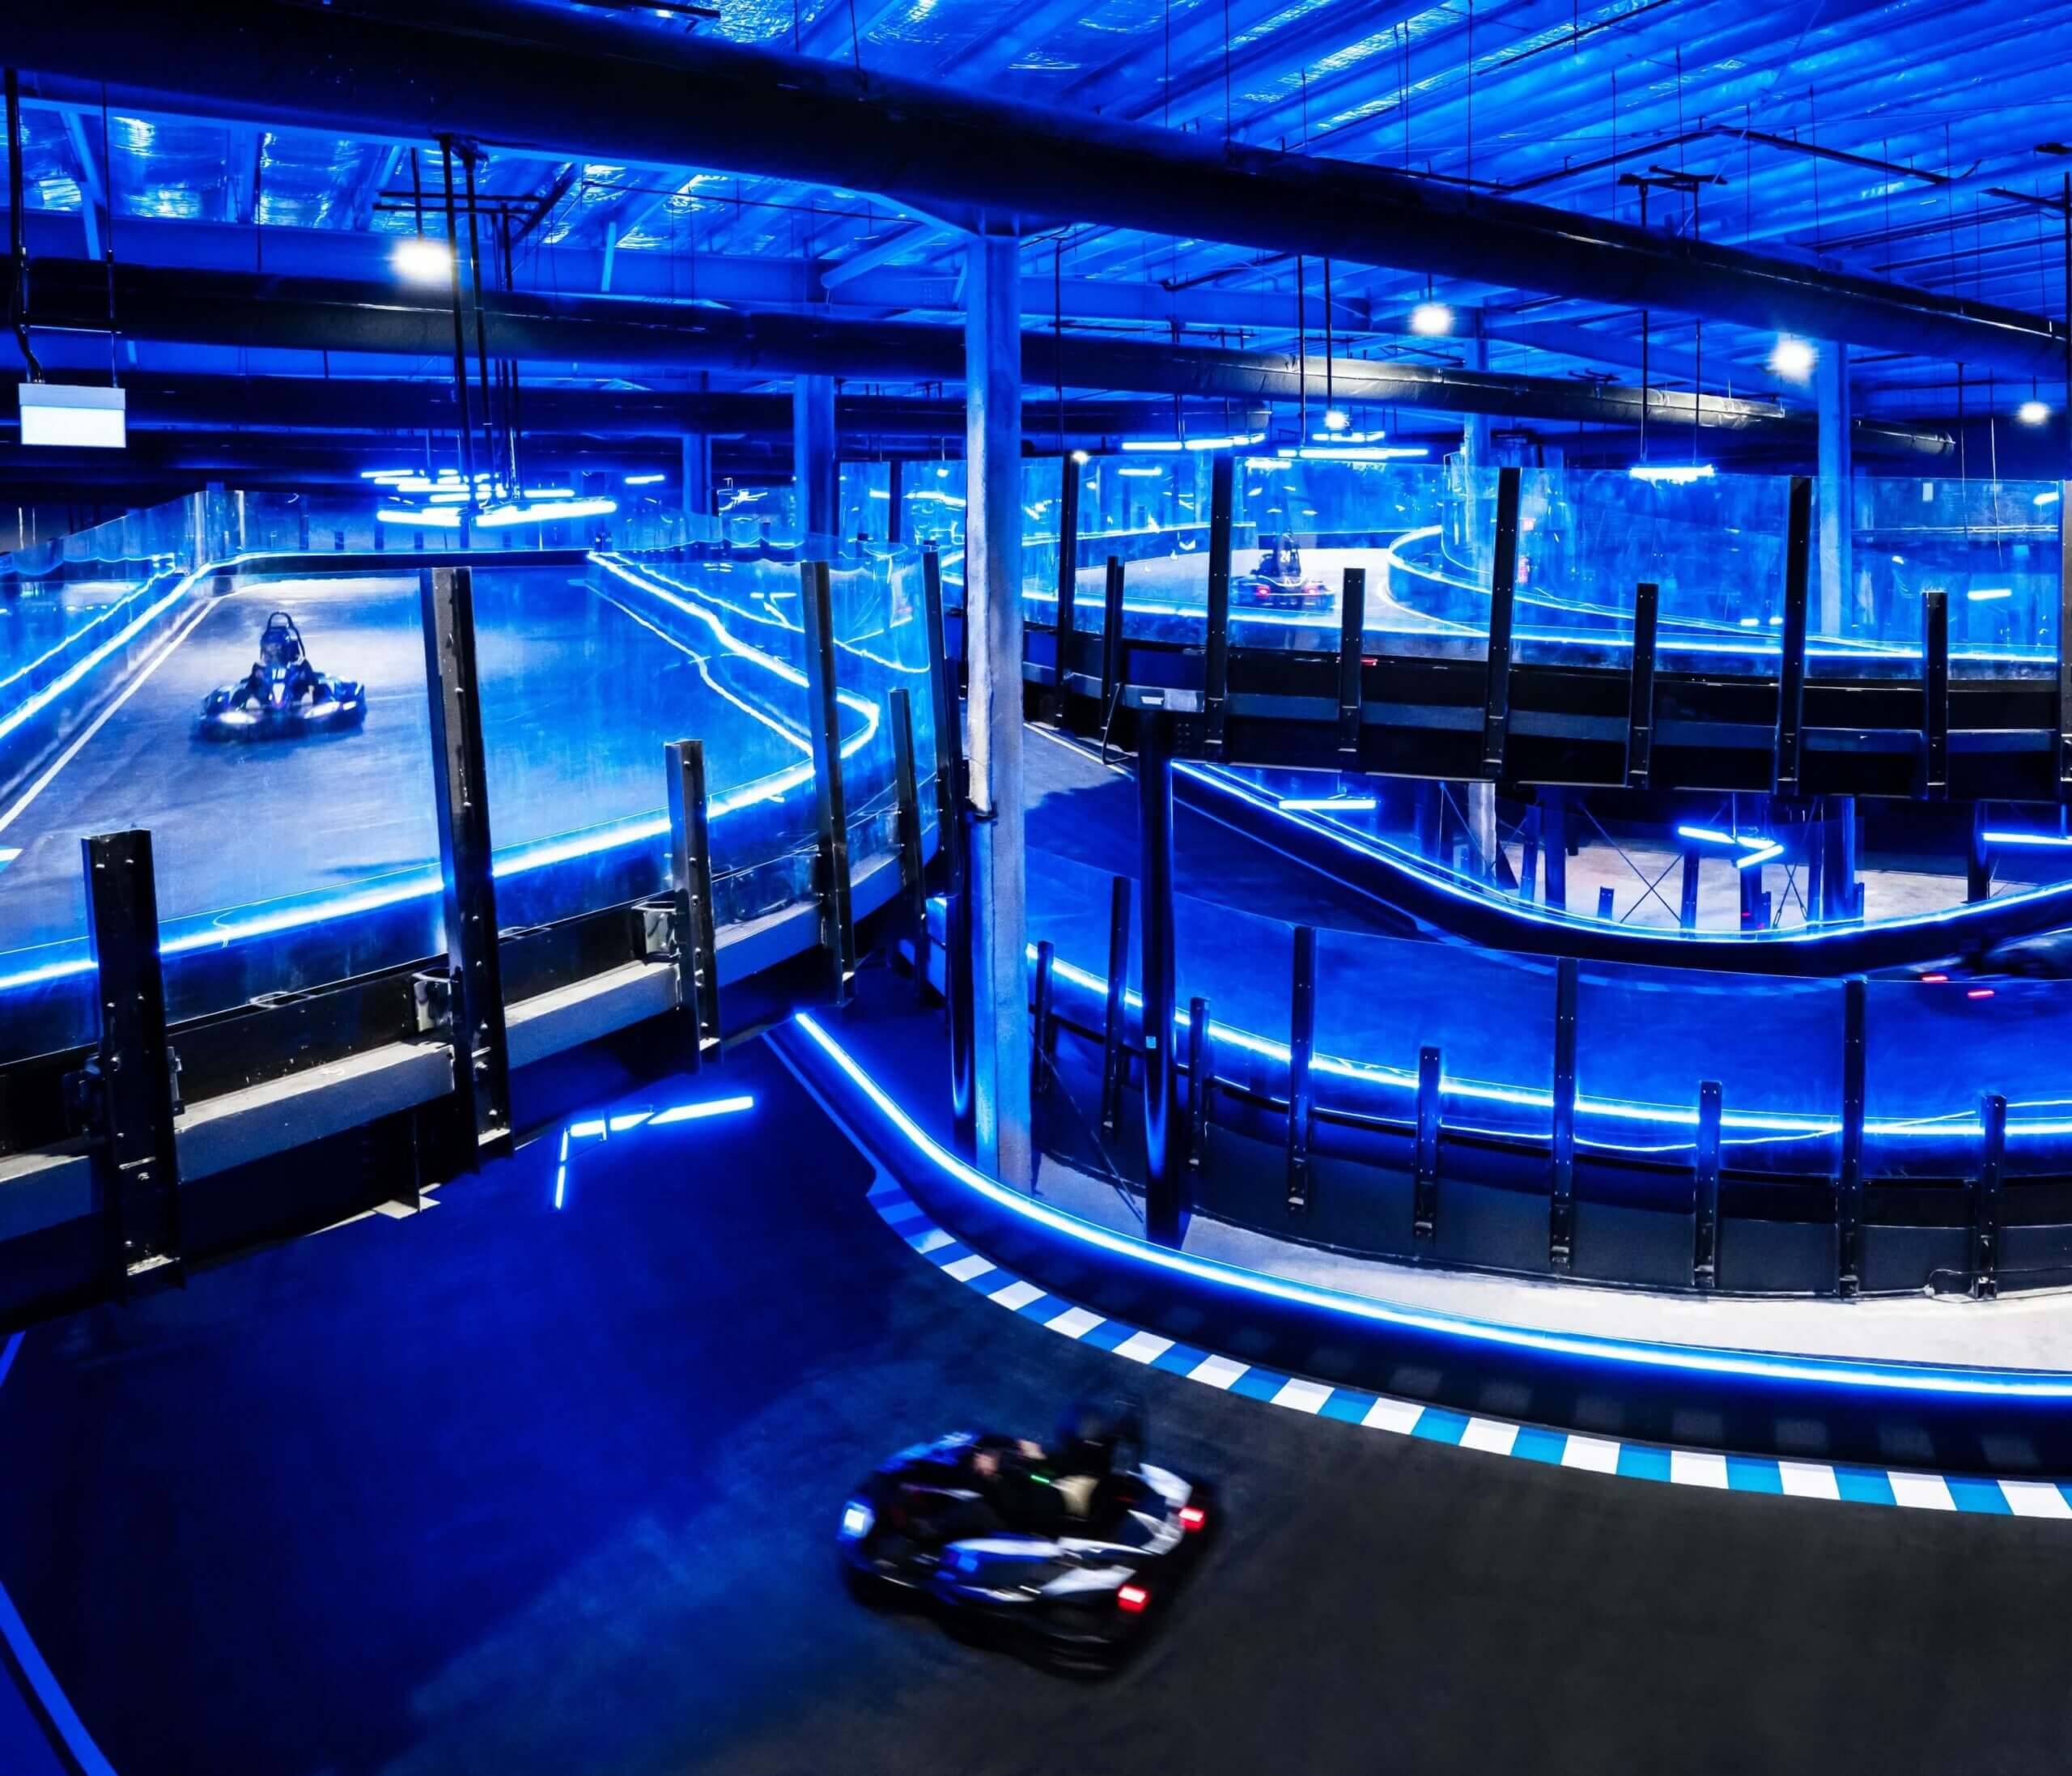 3-level indoor track with 14 thrilling turns